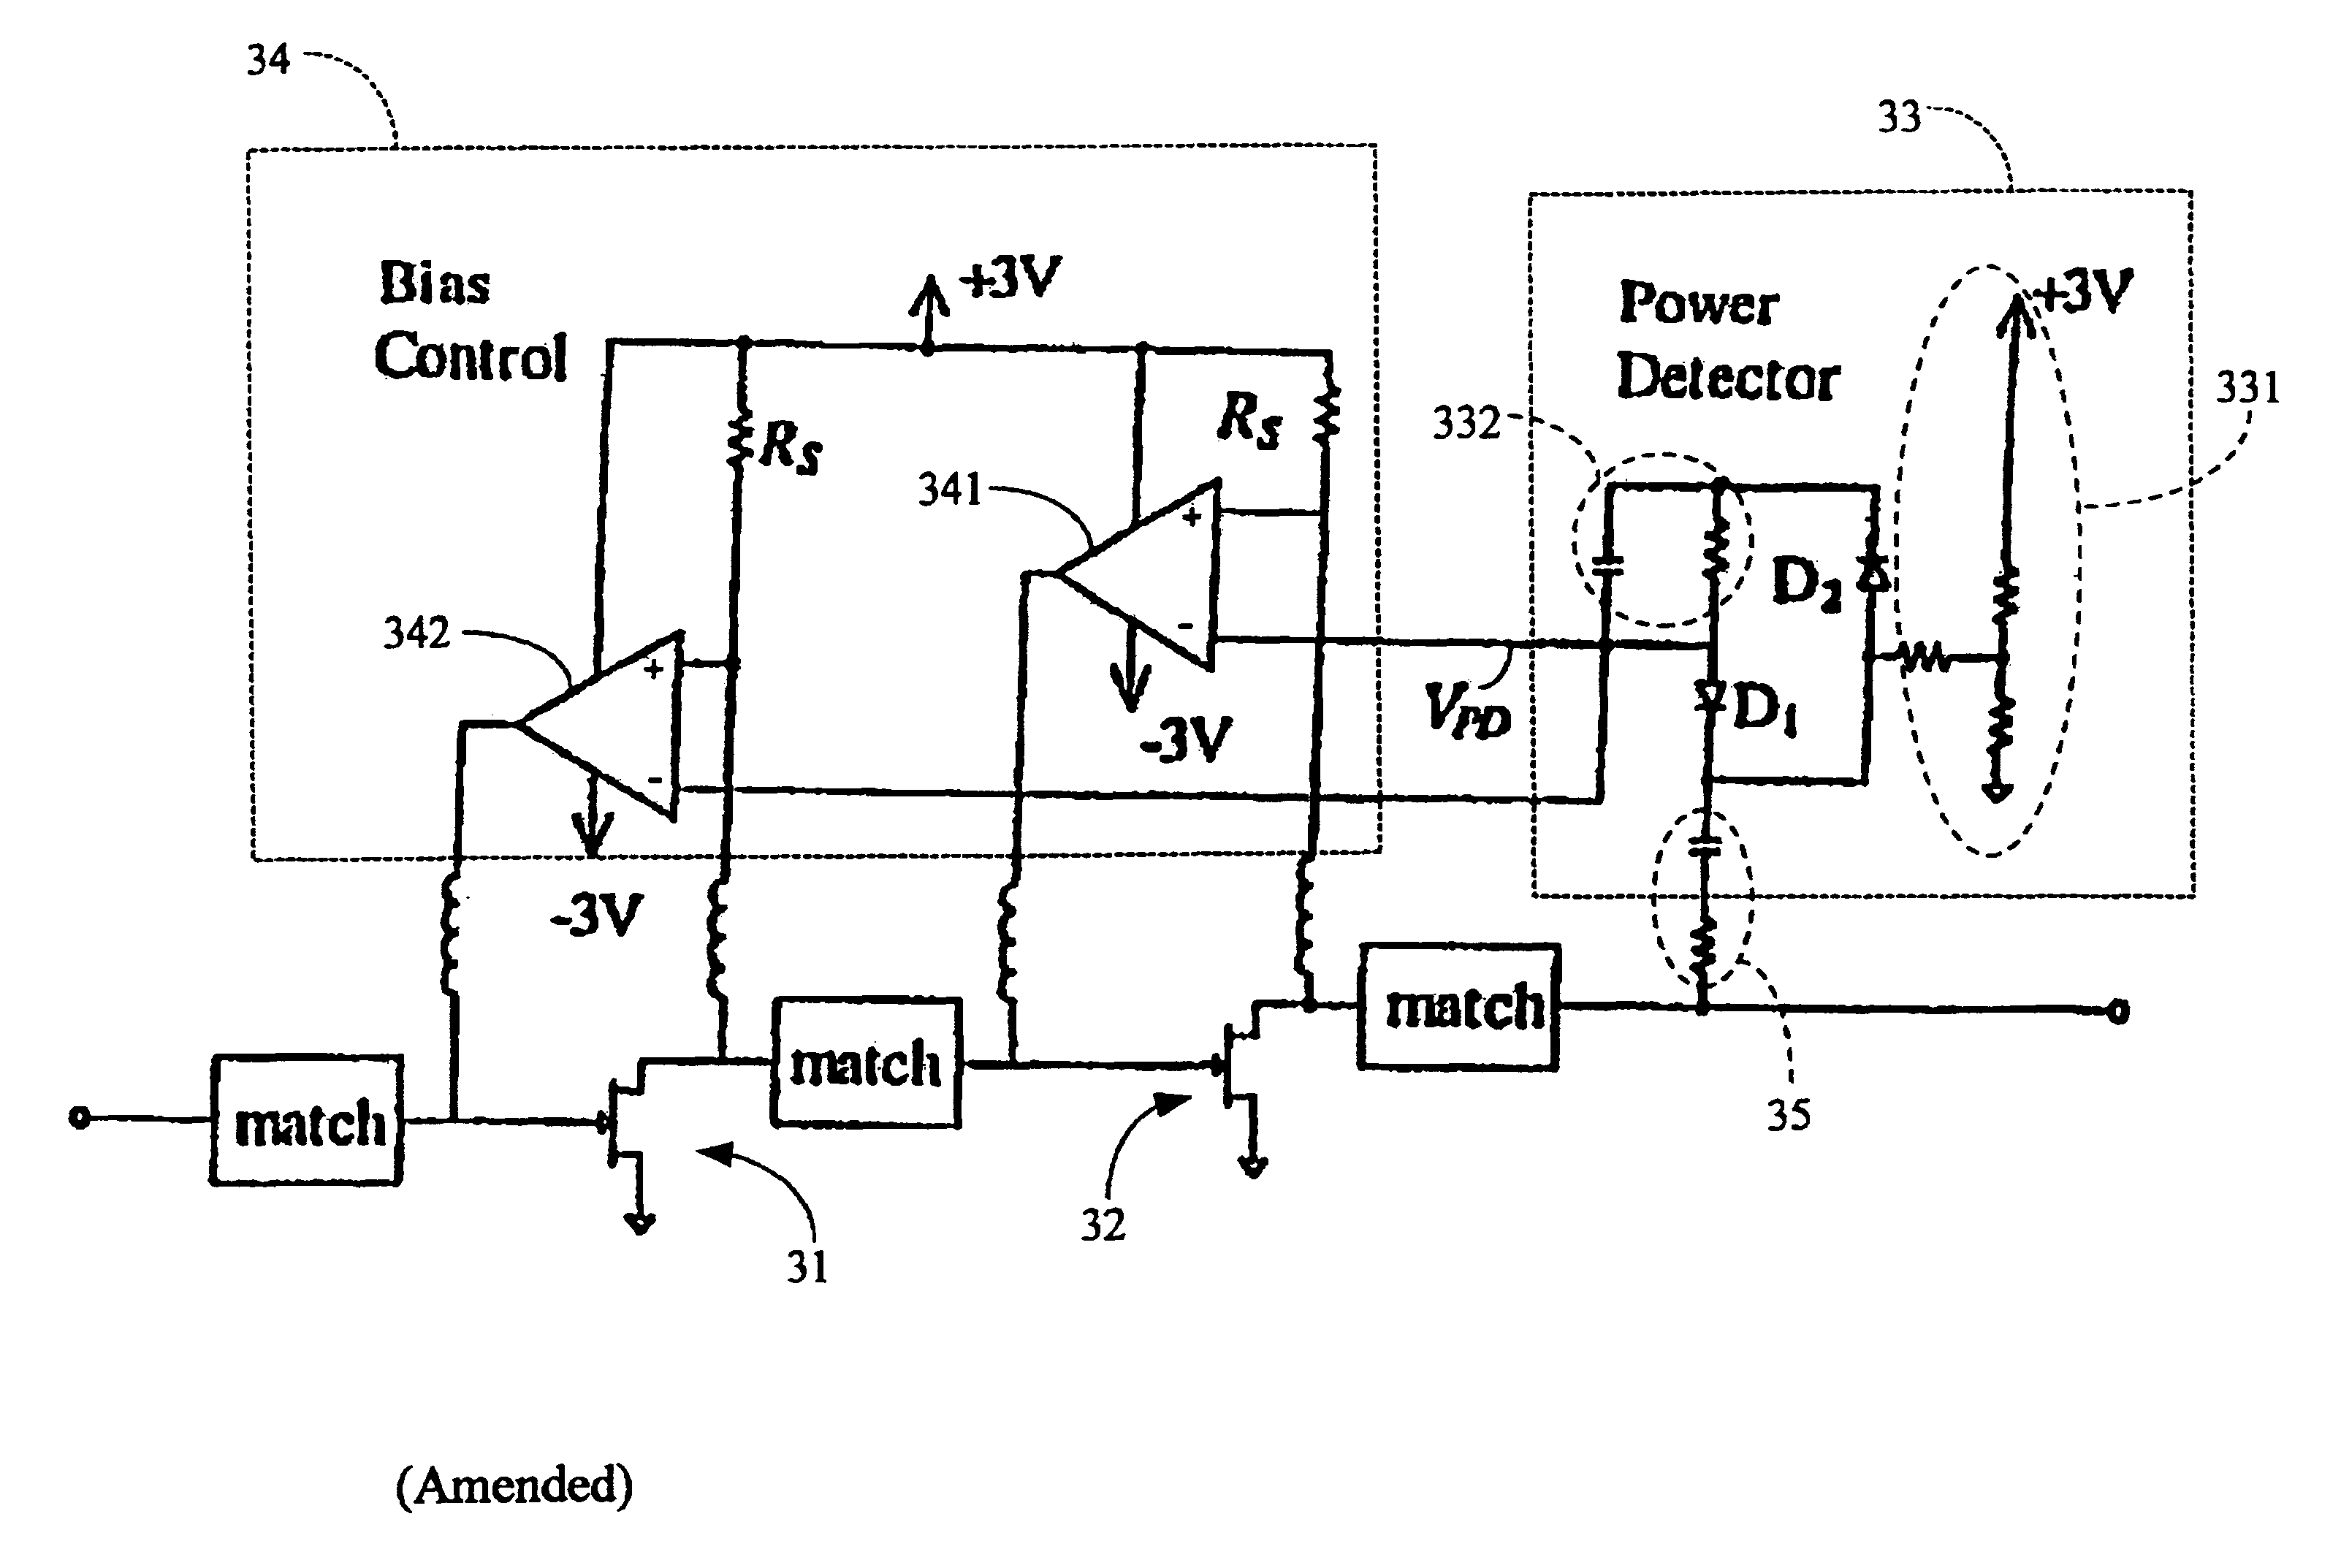 S-band low-noise amplifier with self-adjusting bias for improved power consumption and dynamic range in a mobile environment